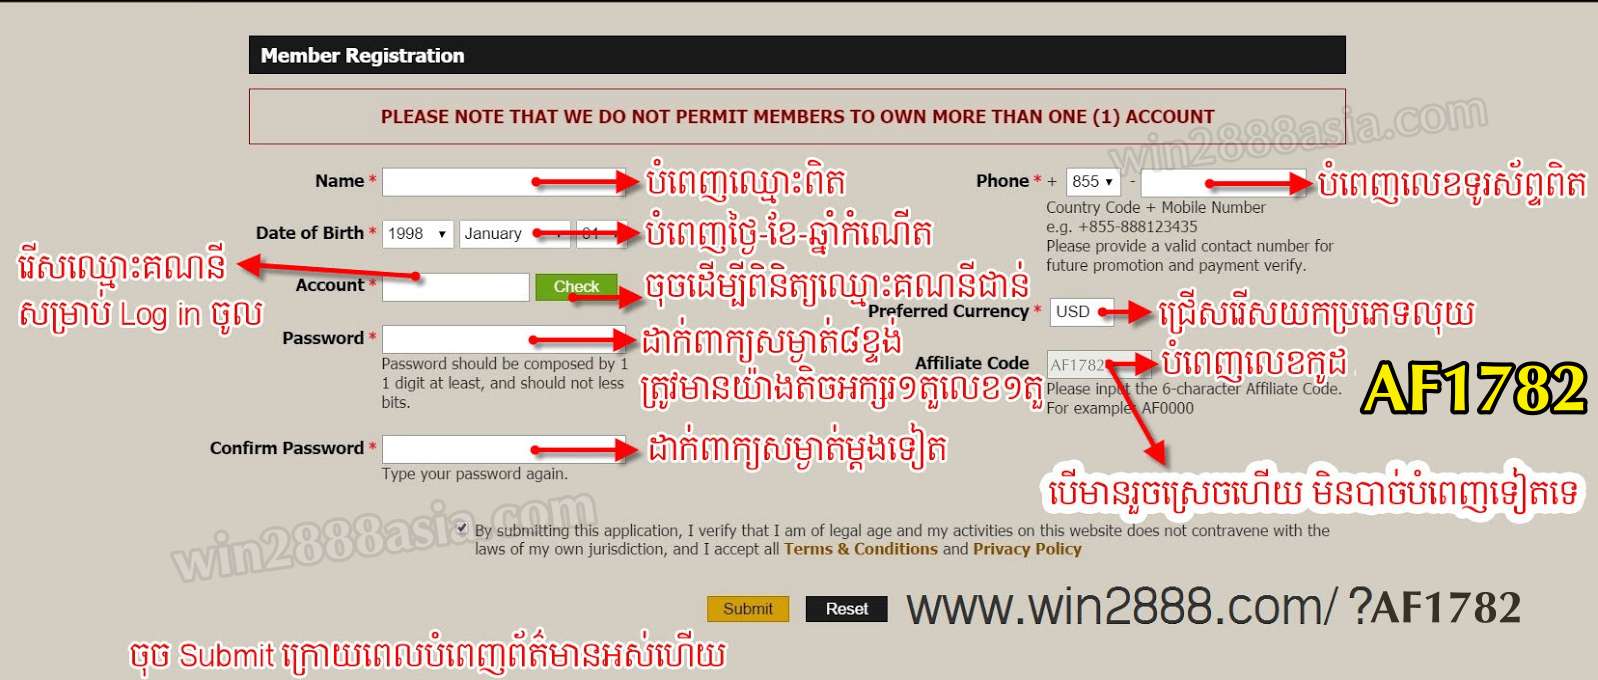 Register Win2888 Open New Account with 2 easy steps in 3 minutes